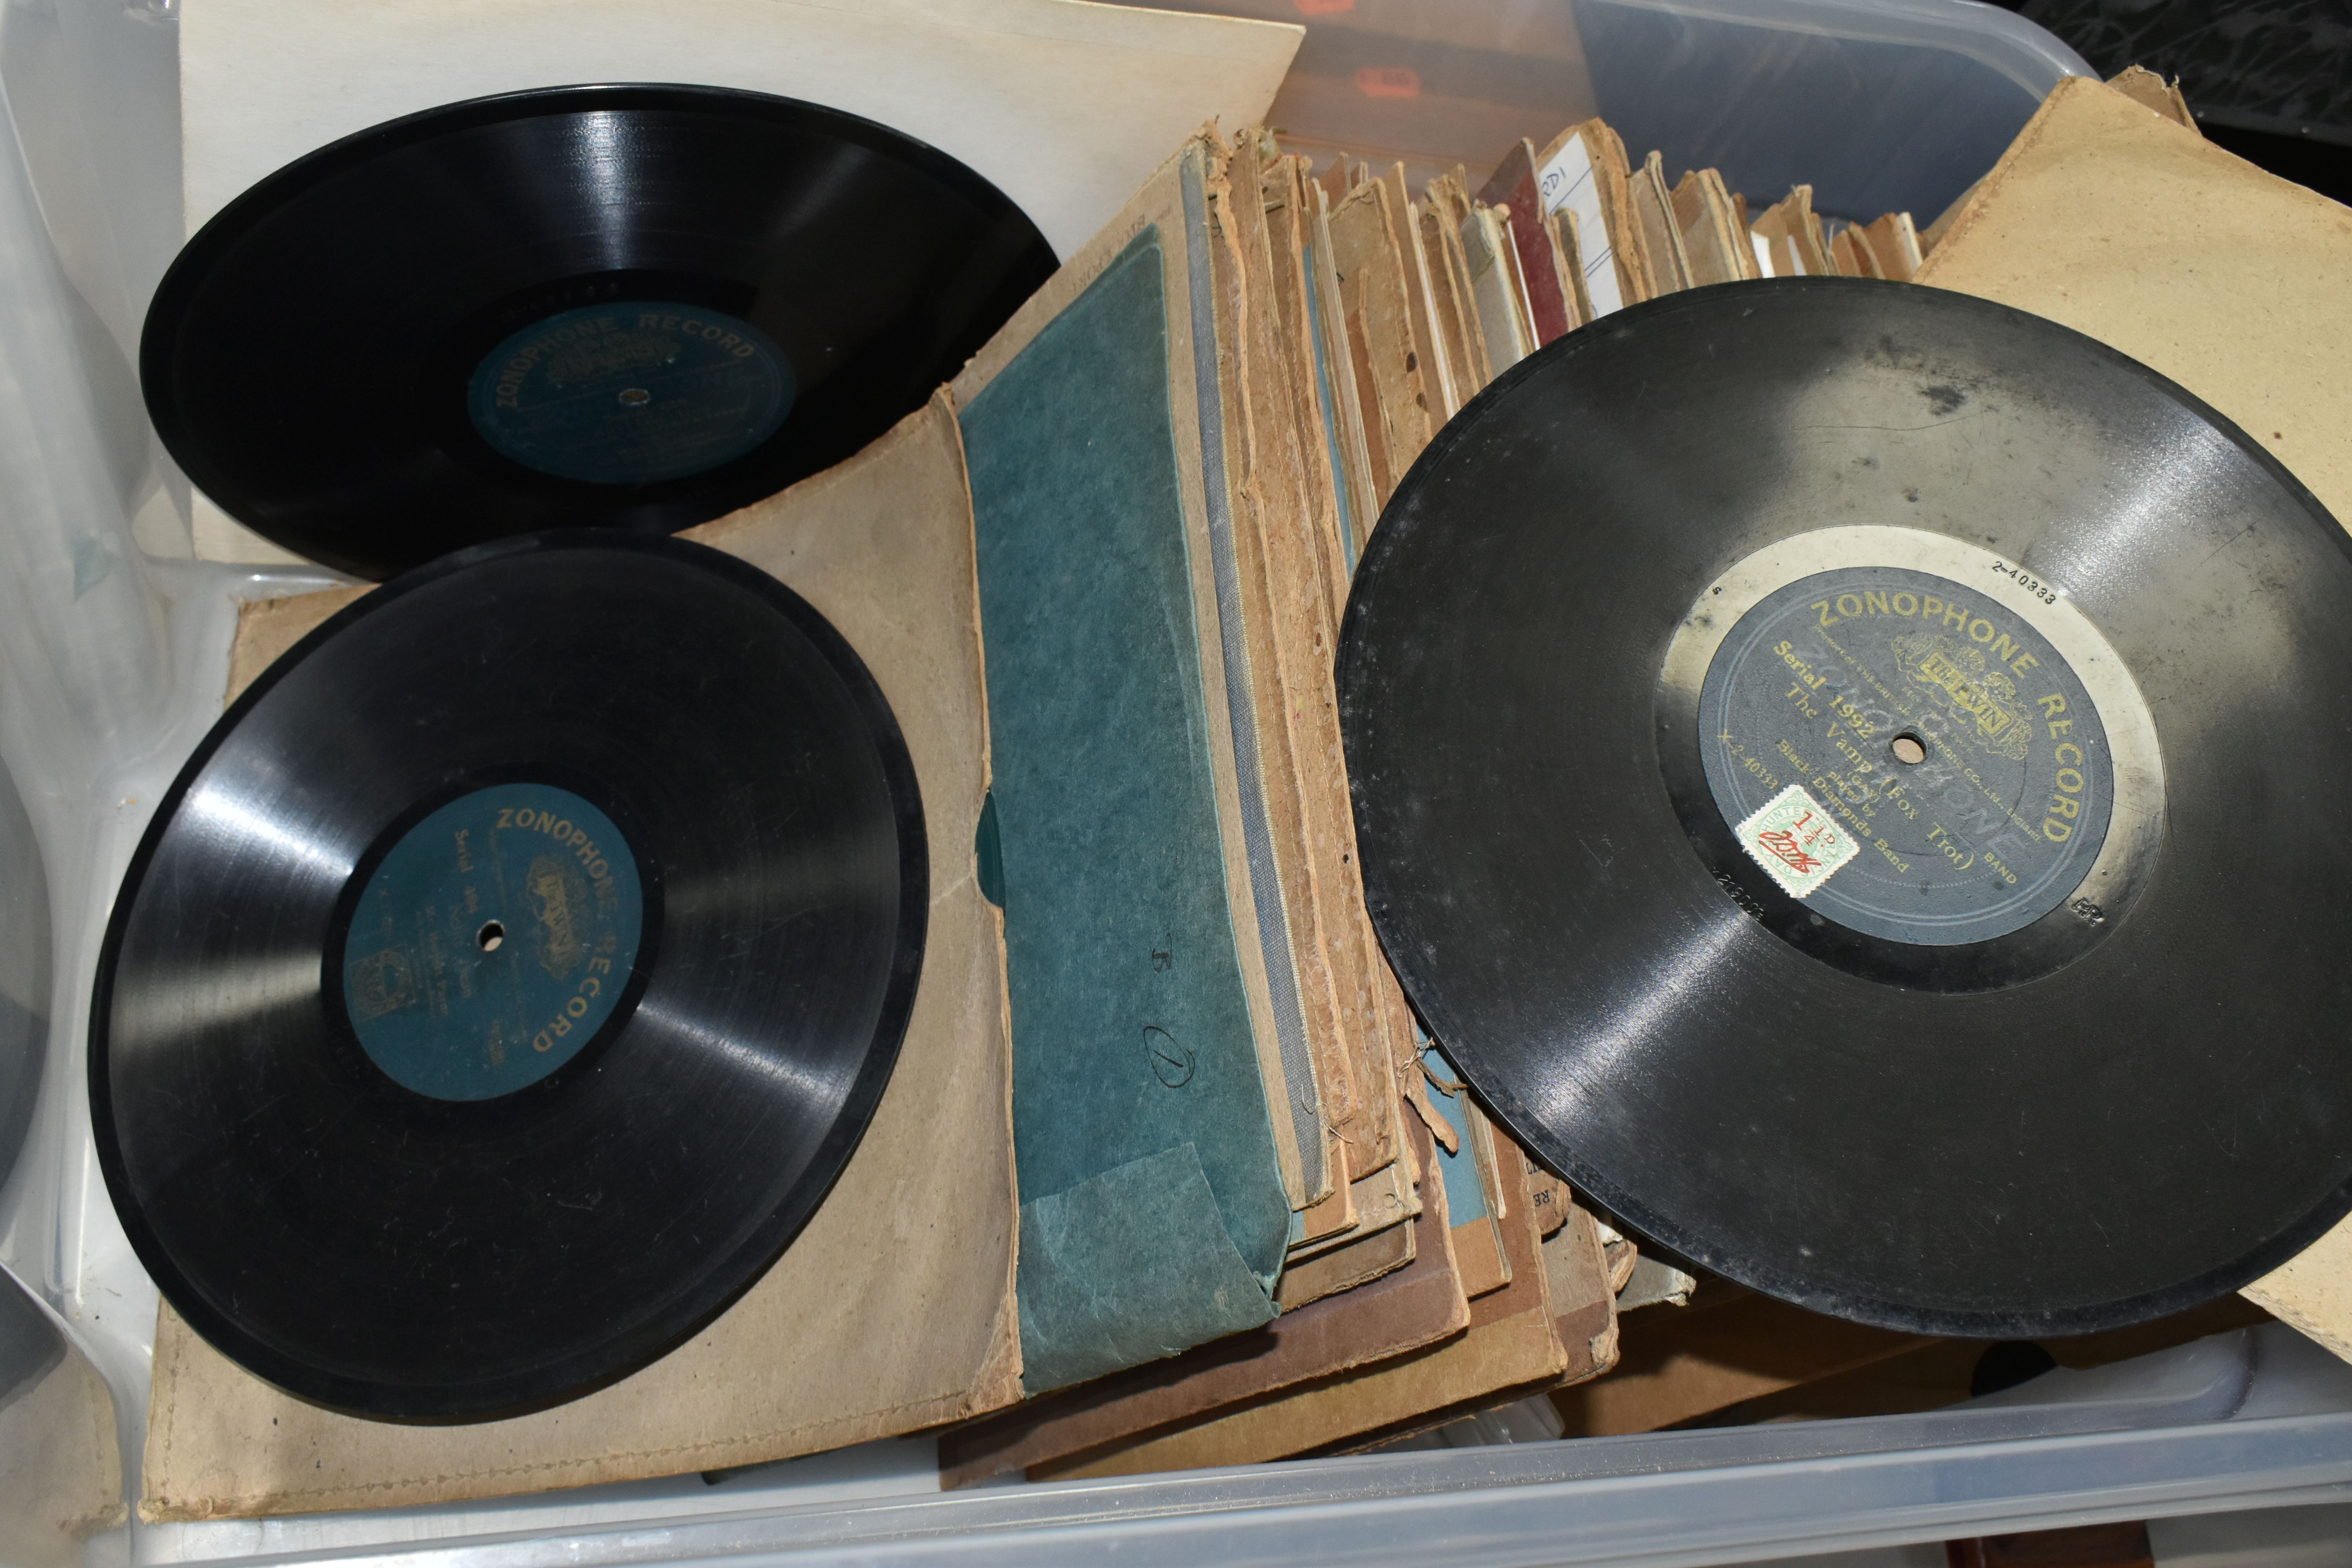 A BOX OF ZONOPHONE RECORDS, recordings are predominantly Music Hall type songs, artists include Miss